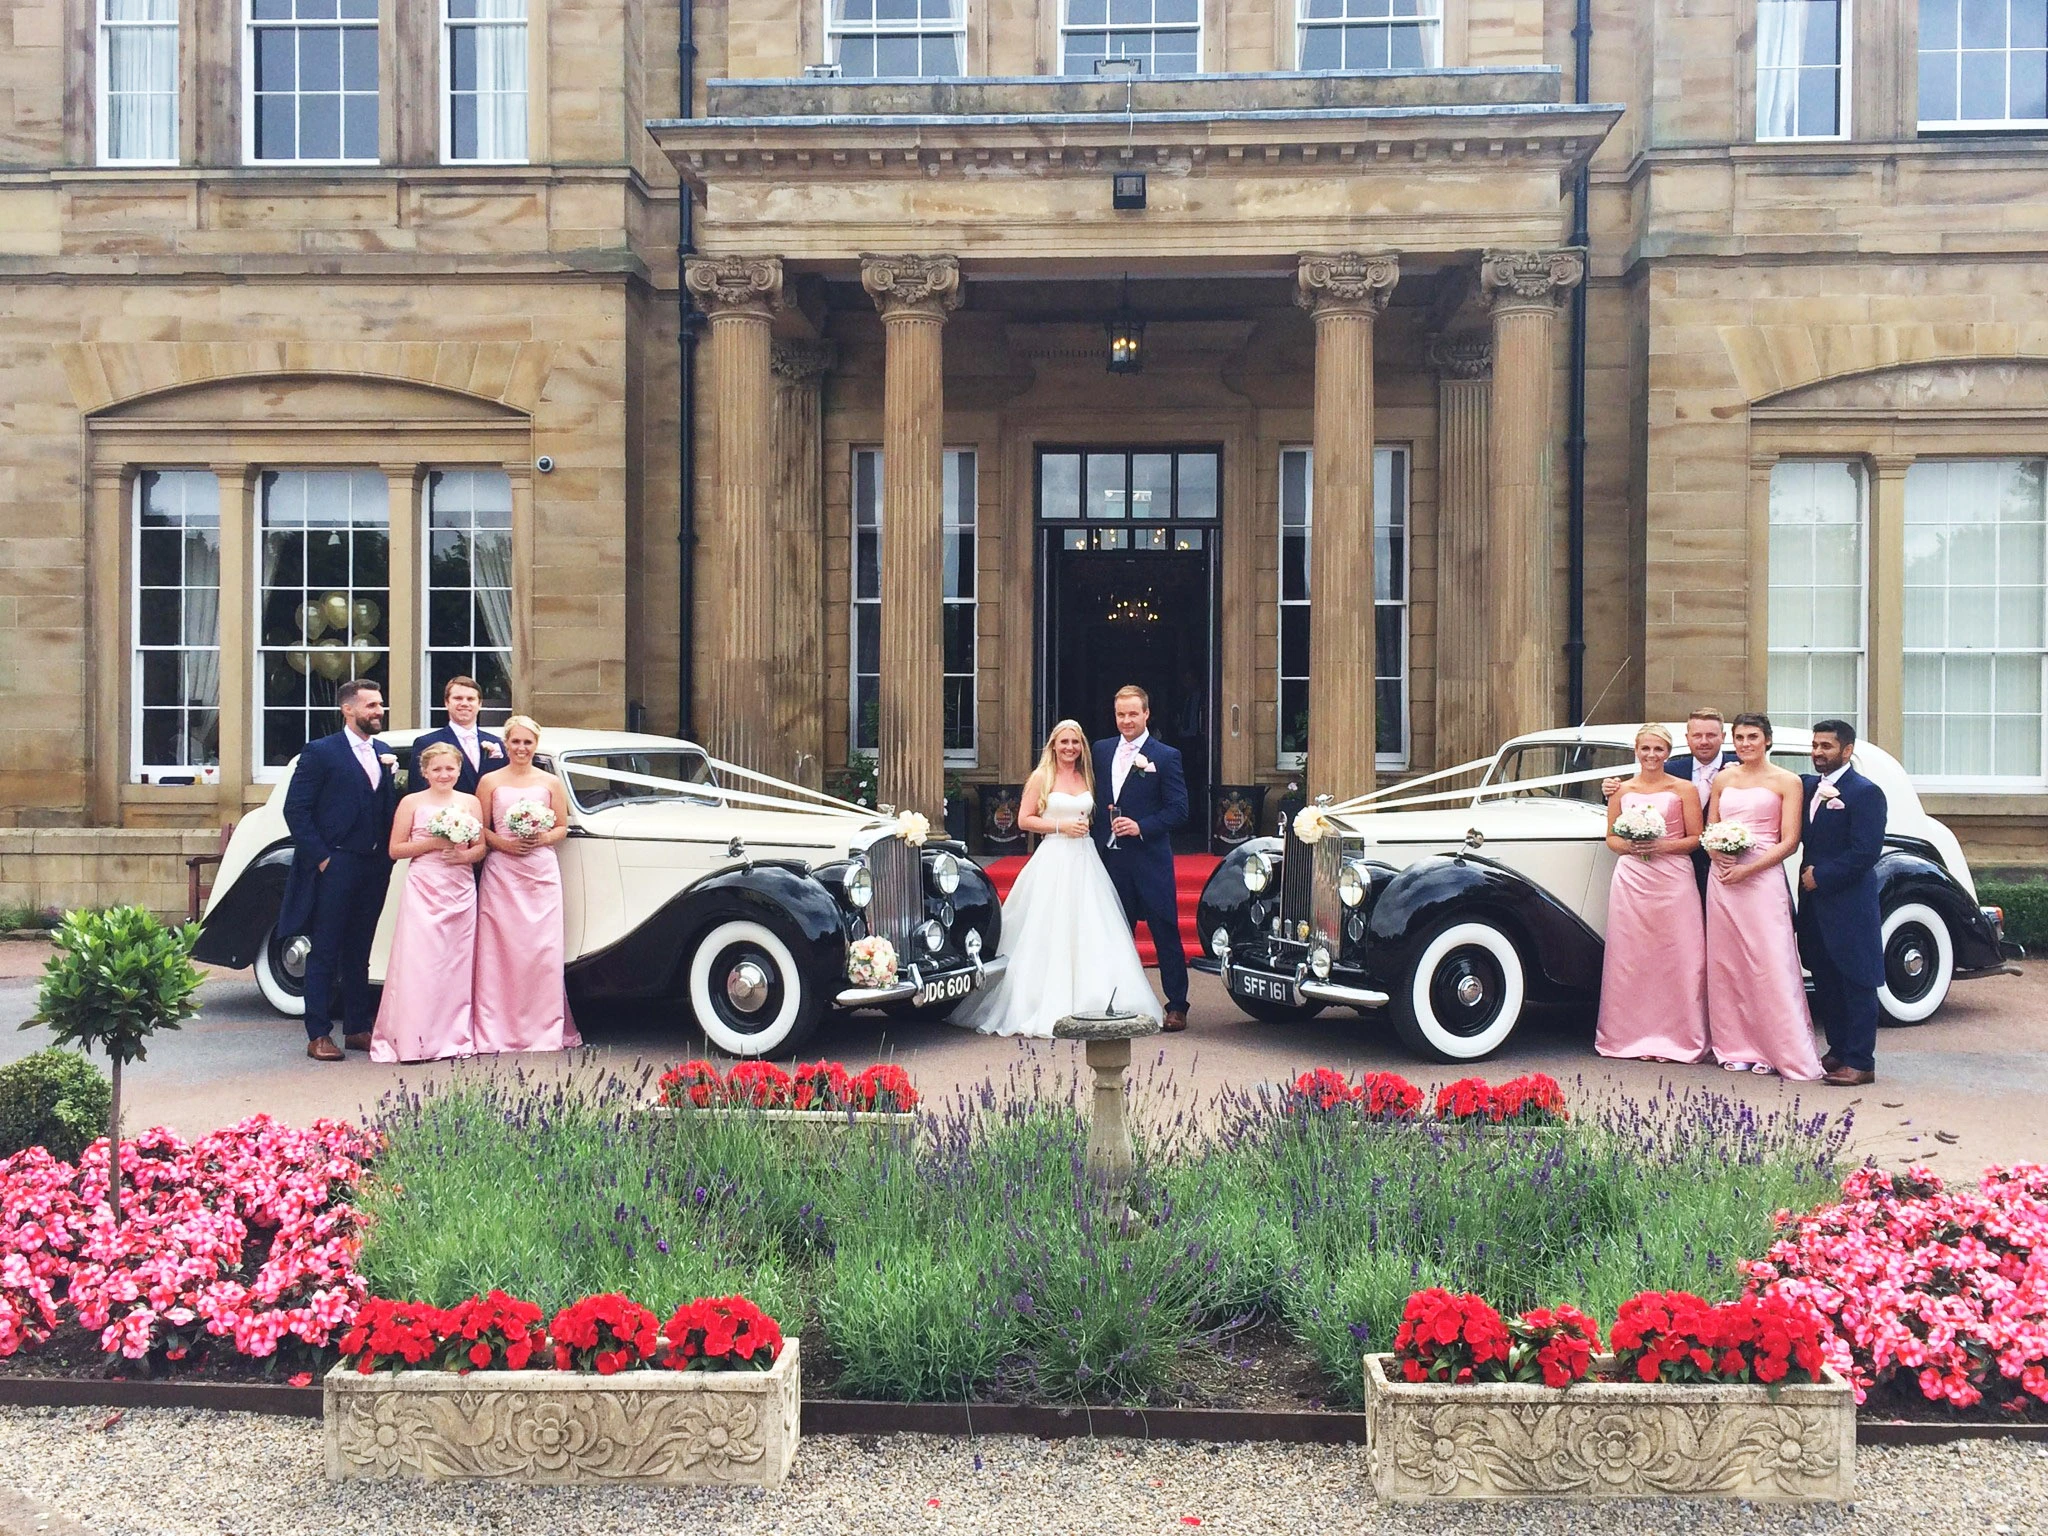 Bride and groom in front with their bridesmaids, best men and their classic cars standing for the photoshoot